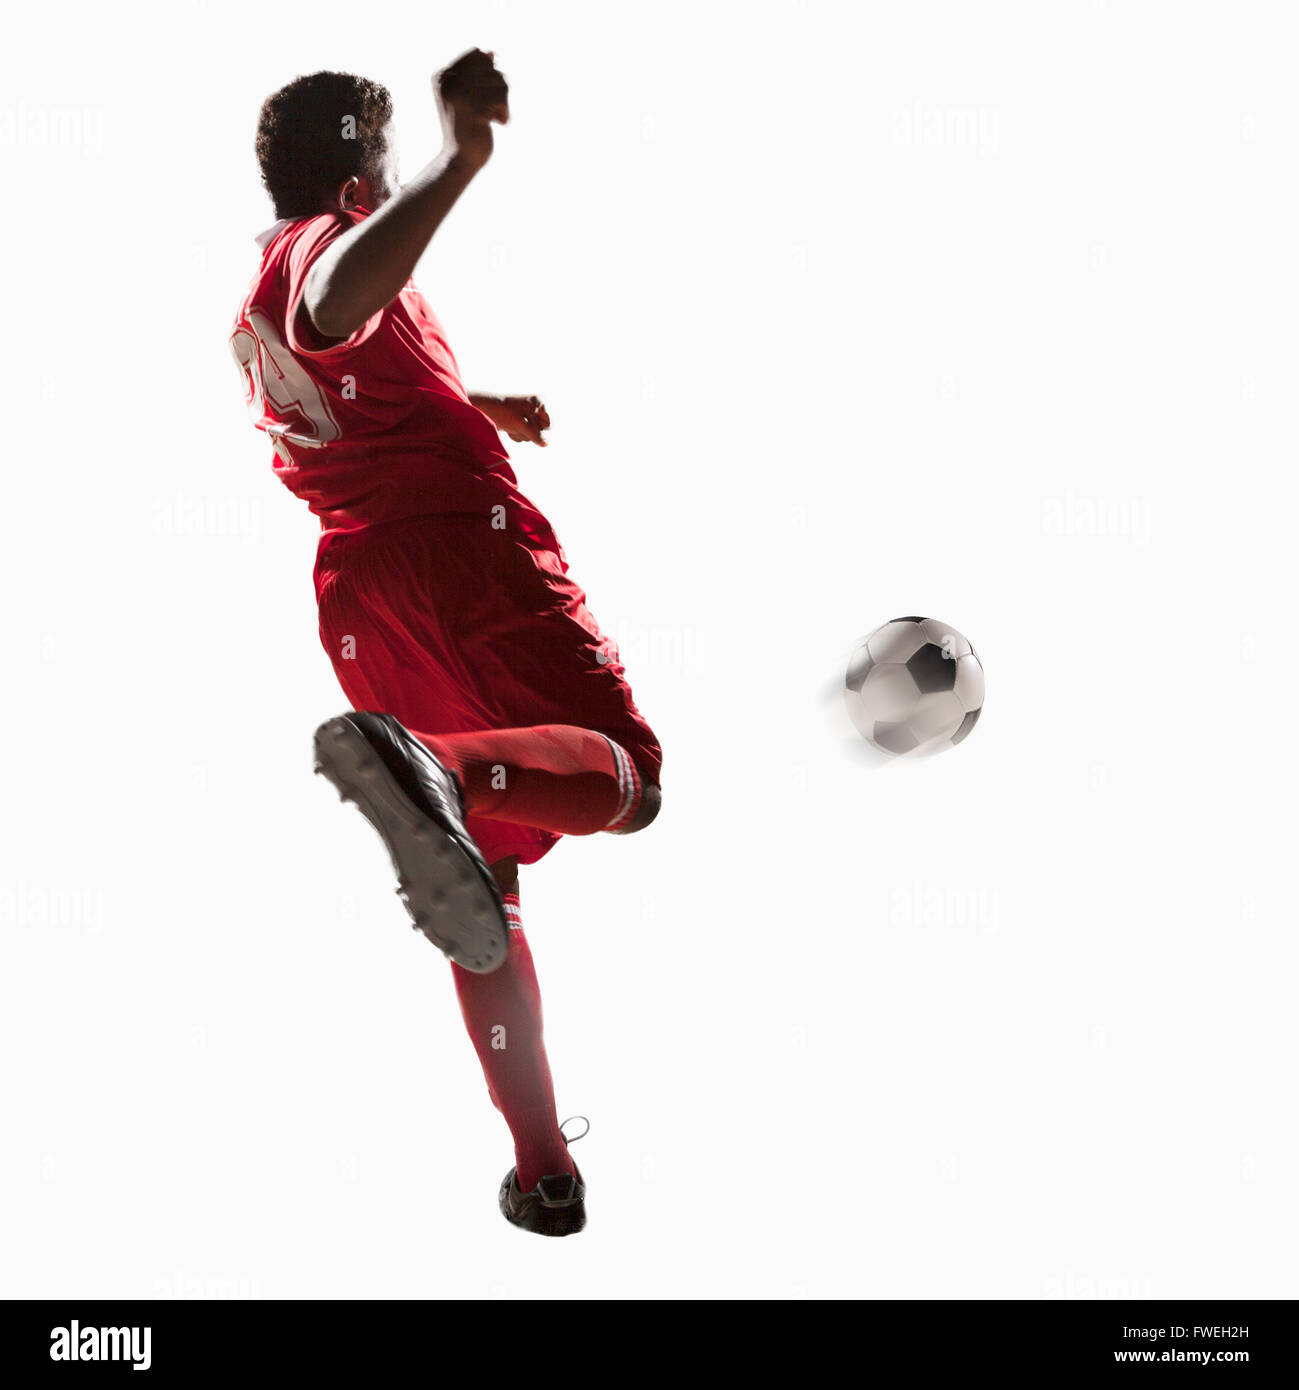 Soccer player kicking soccer ball Banque D'Images